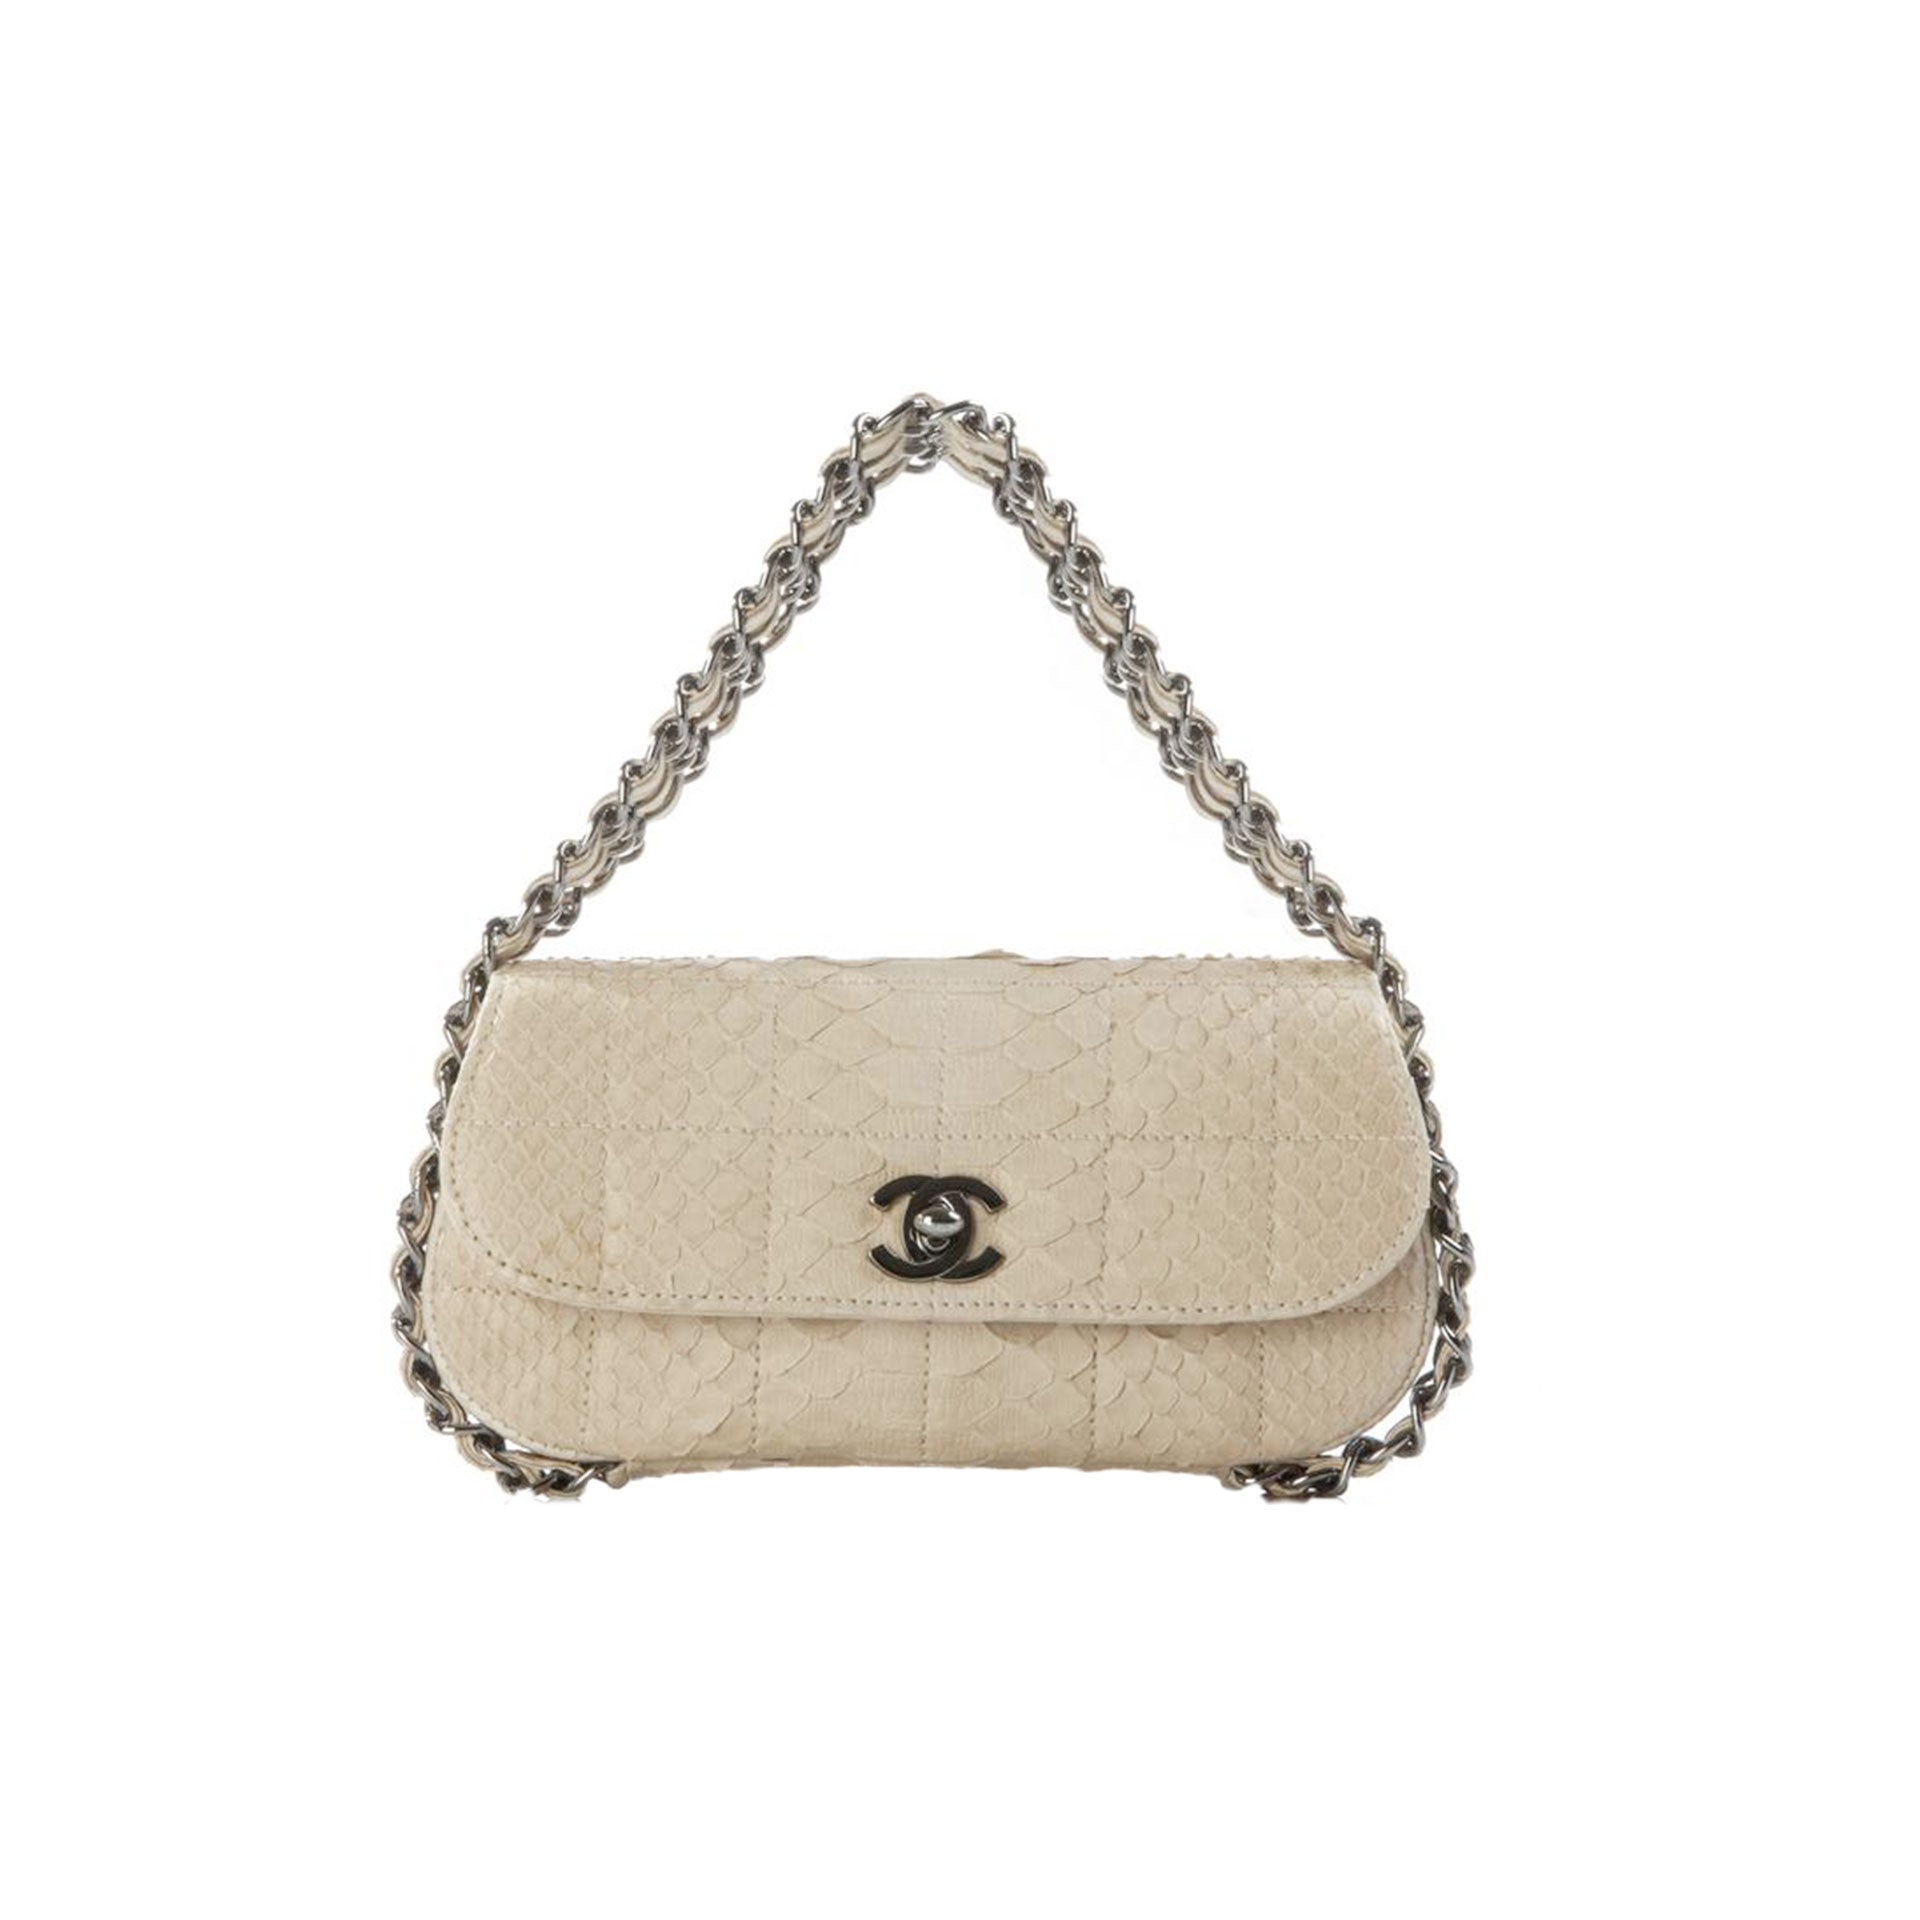 Chanel Quilted Mini Gold Classic Flap Pouch Chain Bag 1111c28